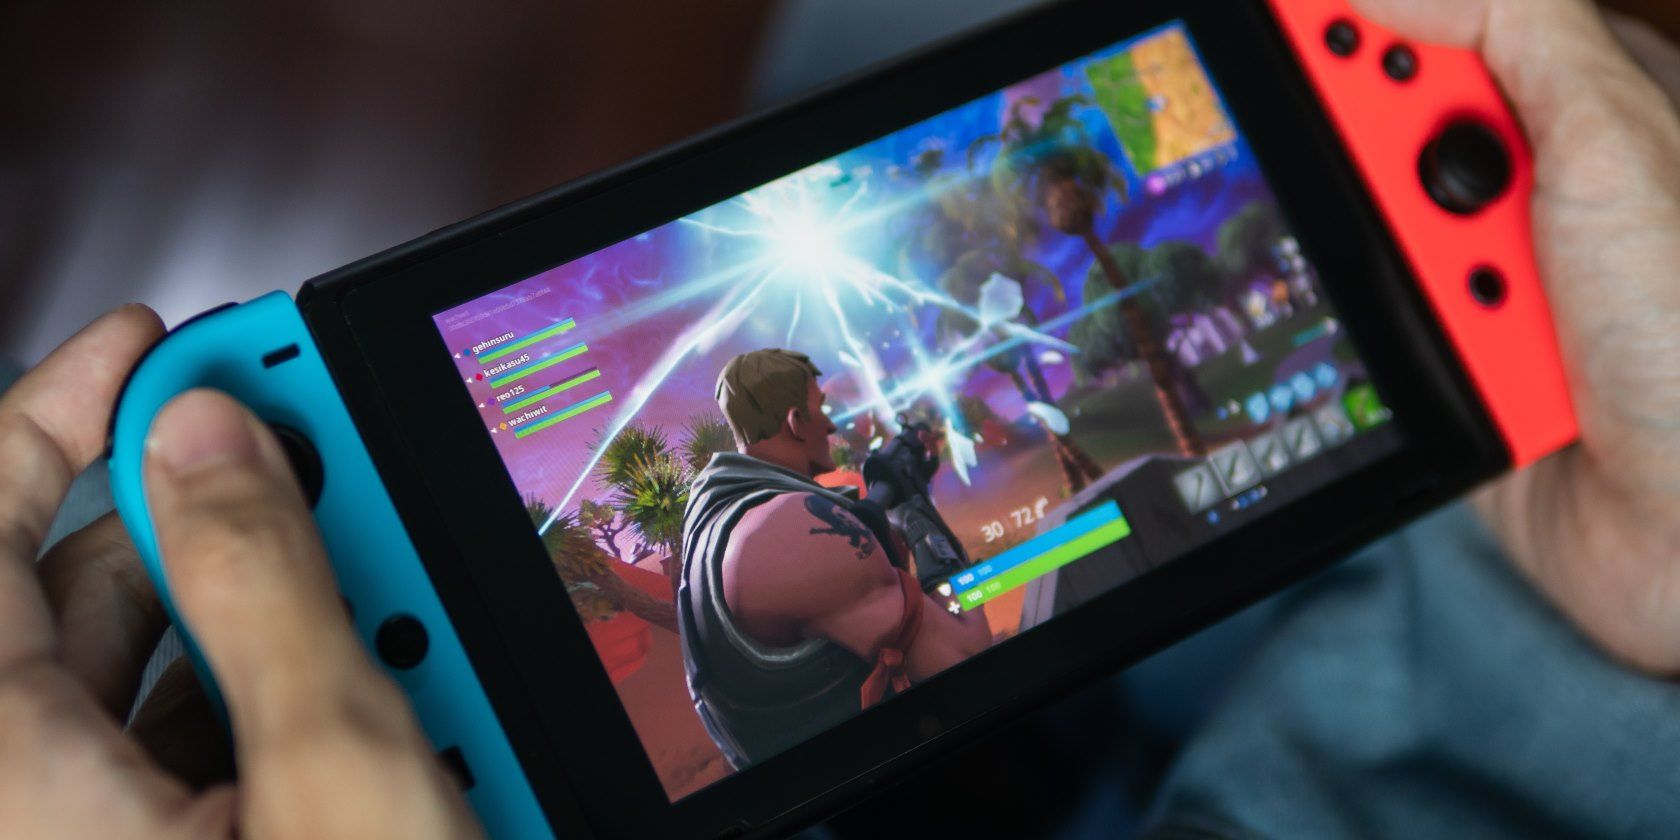 Playing Fortnite on a Nintendo Switch